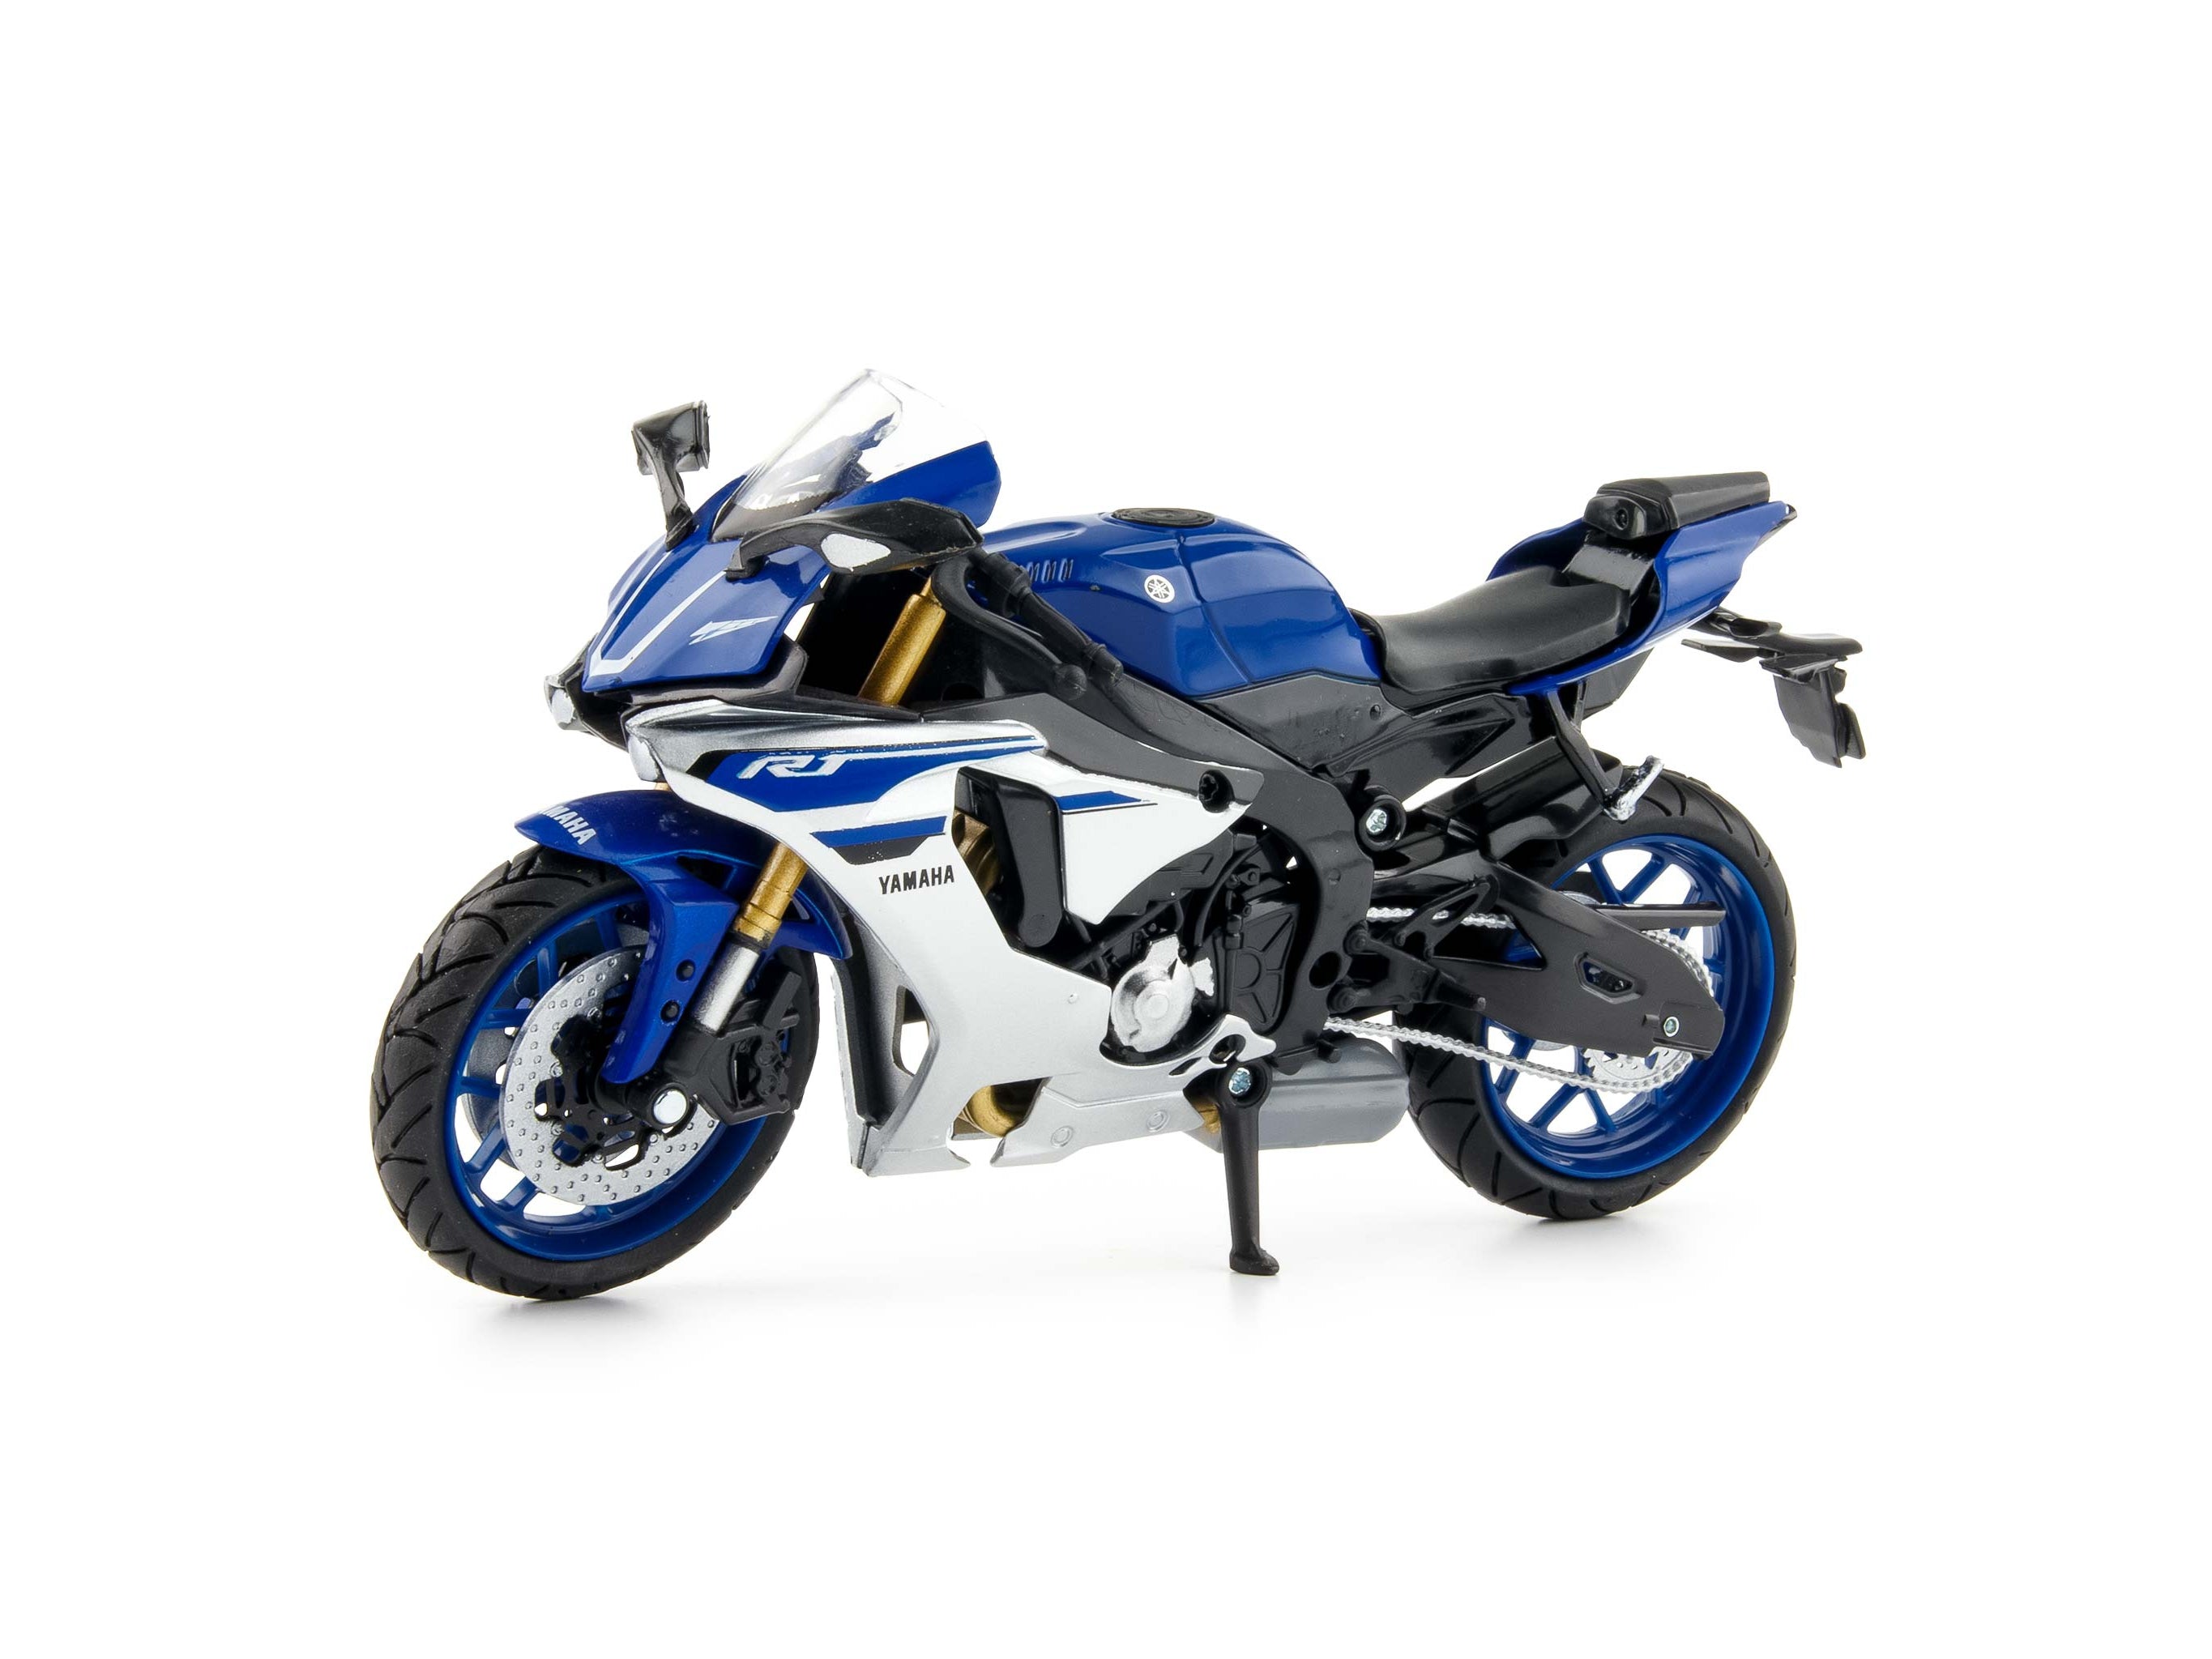 Yamaha YZF-R1 2015 blue - 1:12 Scale Diecast Model Motorcycle